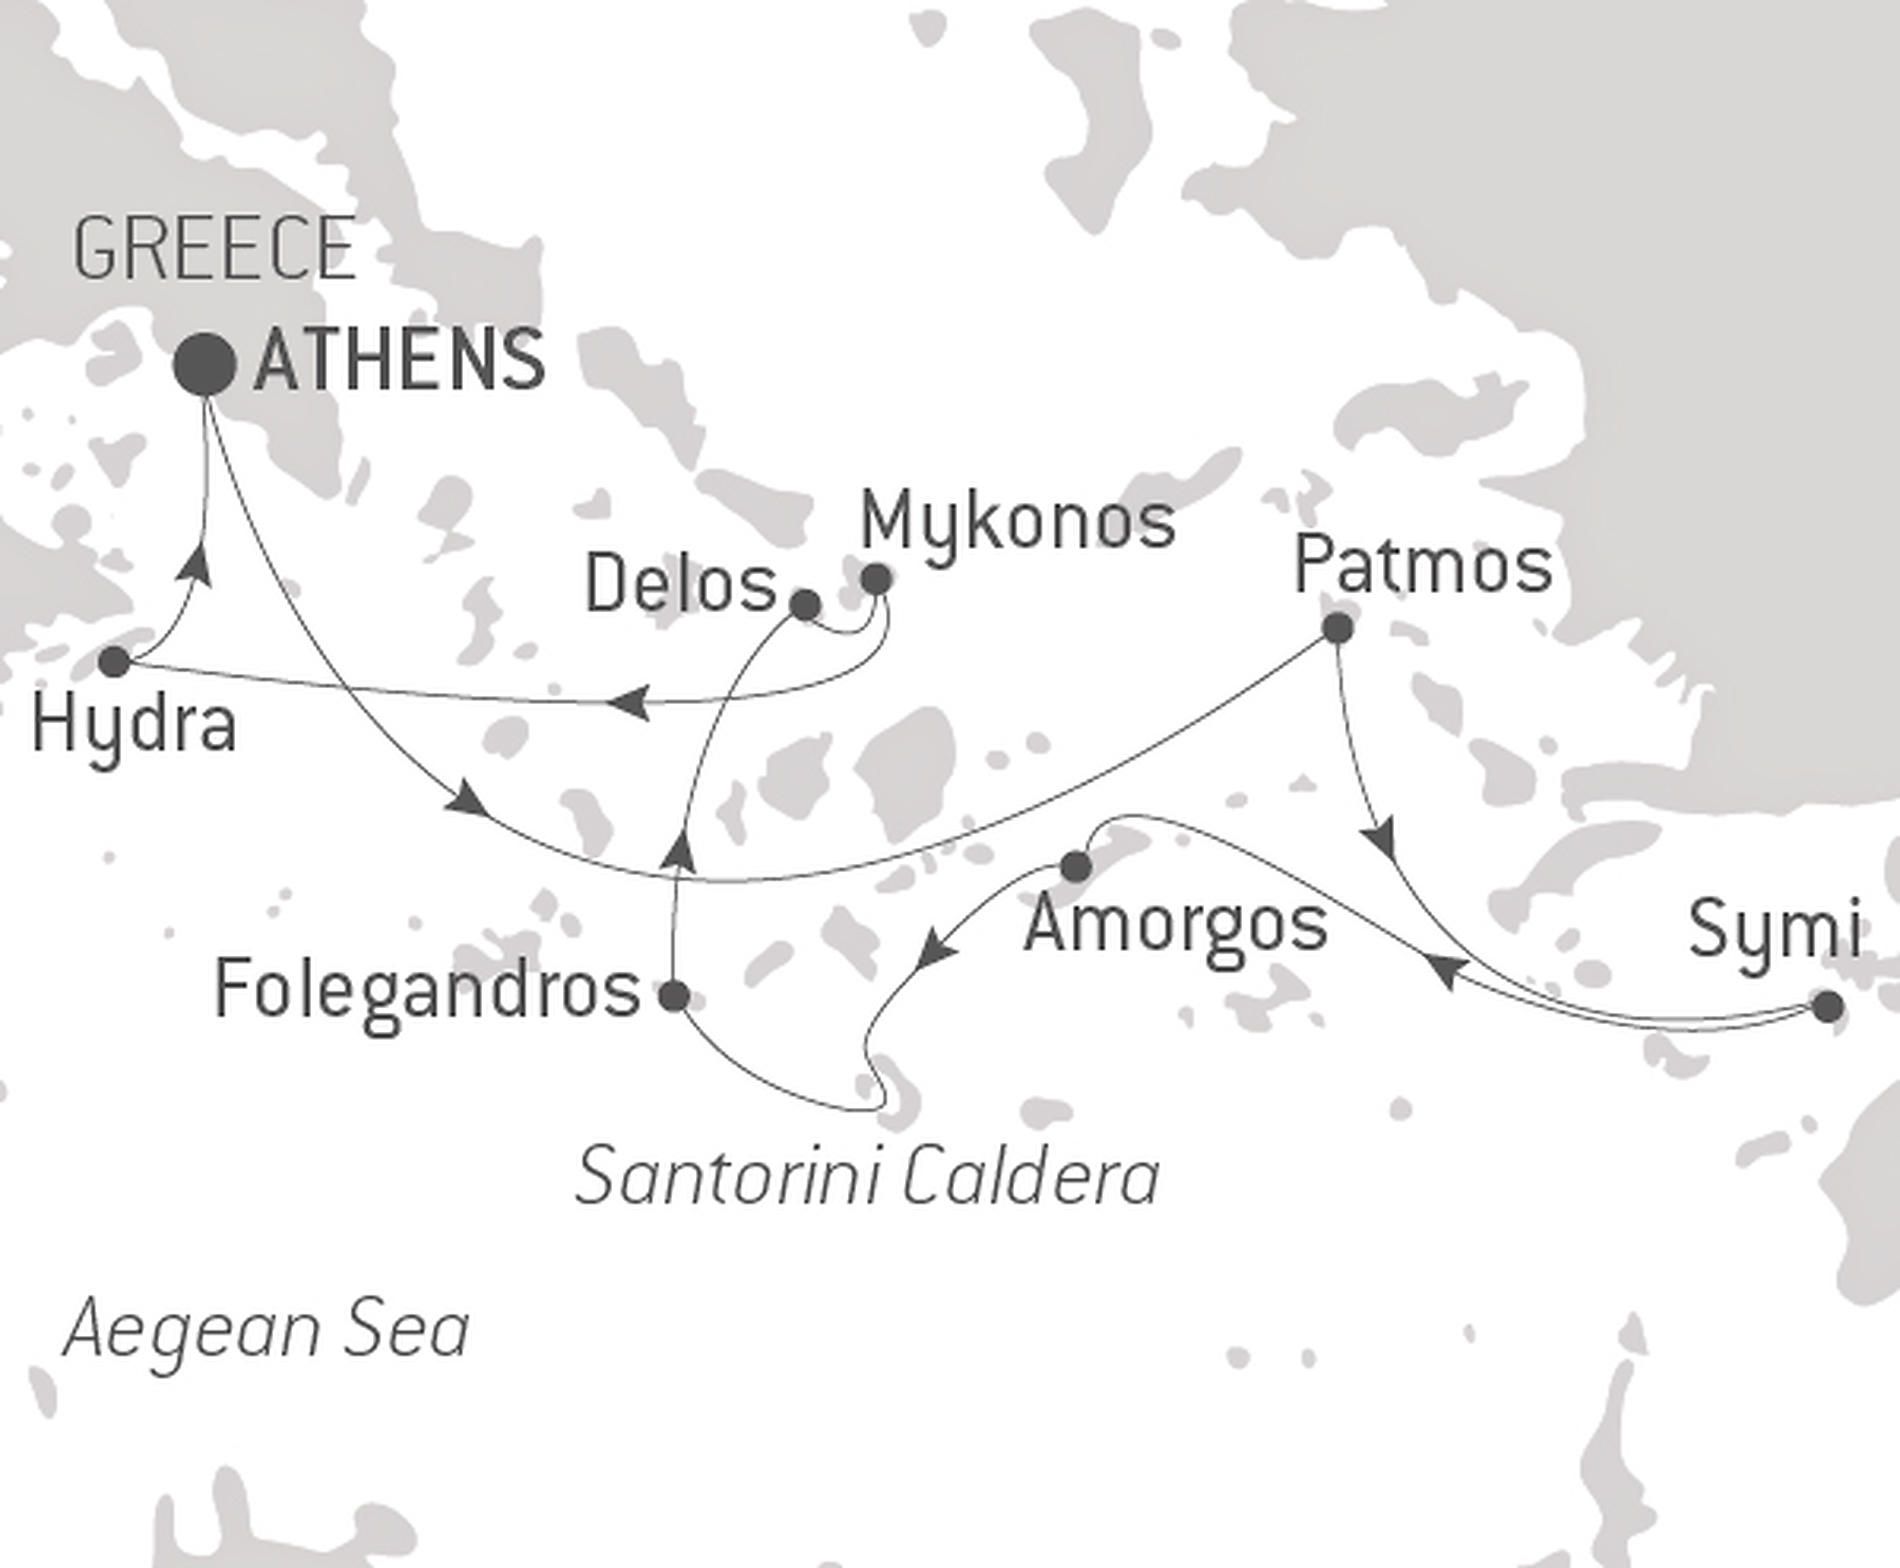 At the heart of the Greek islands